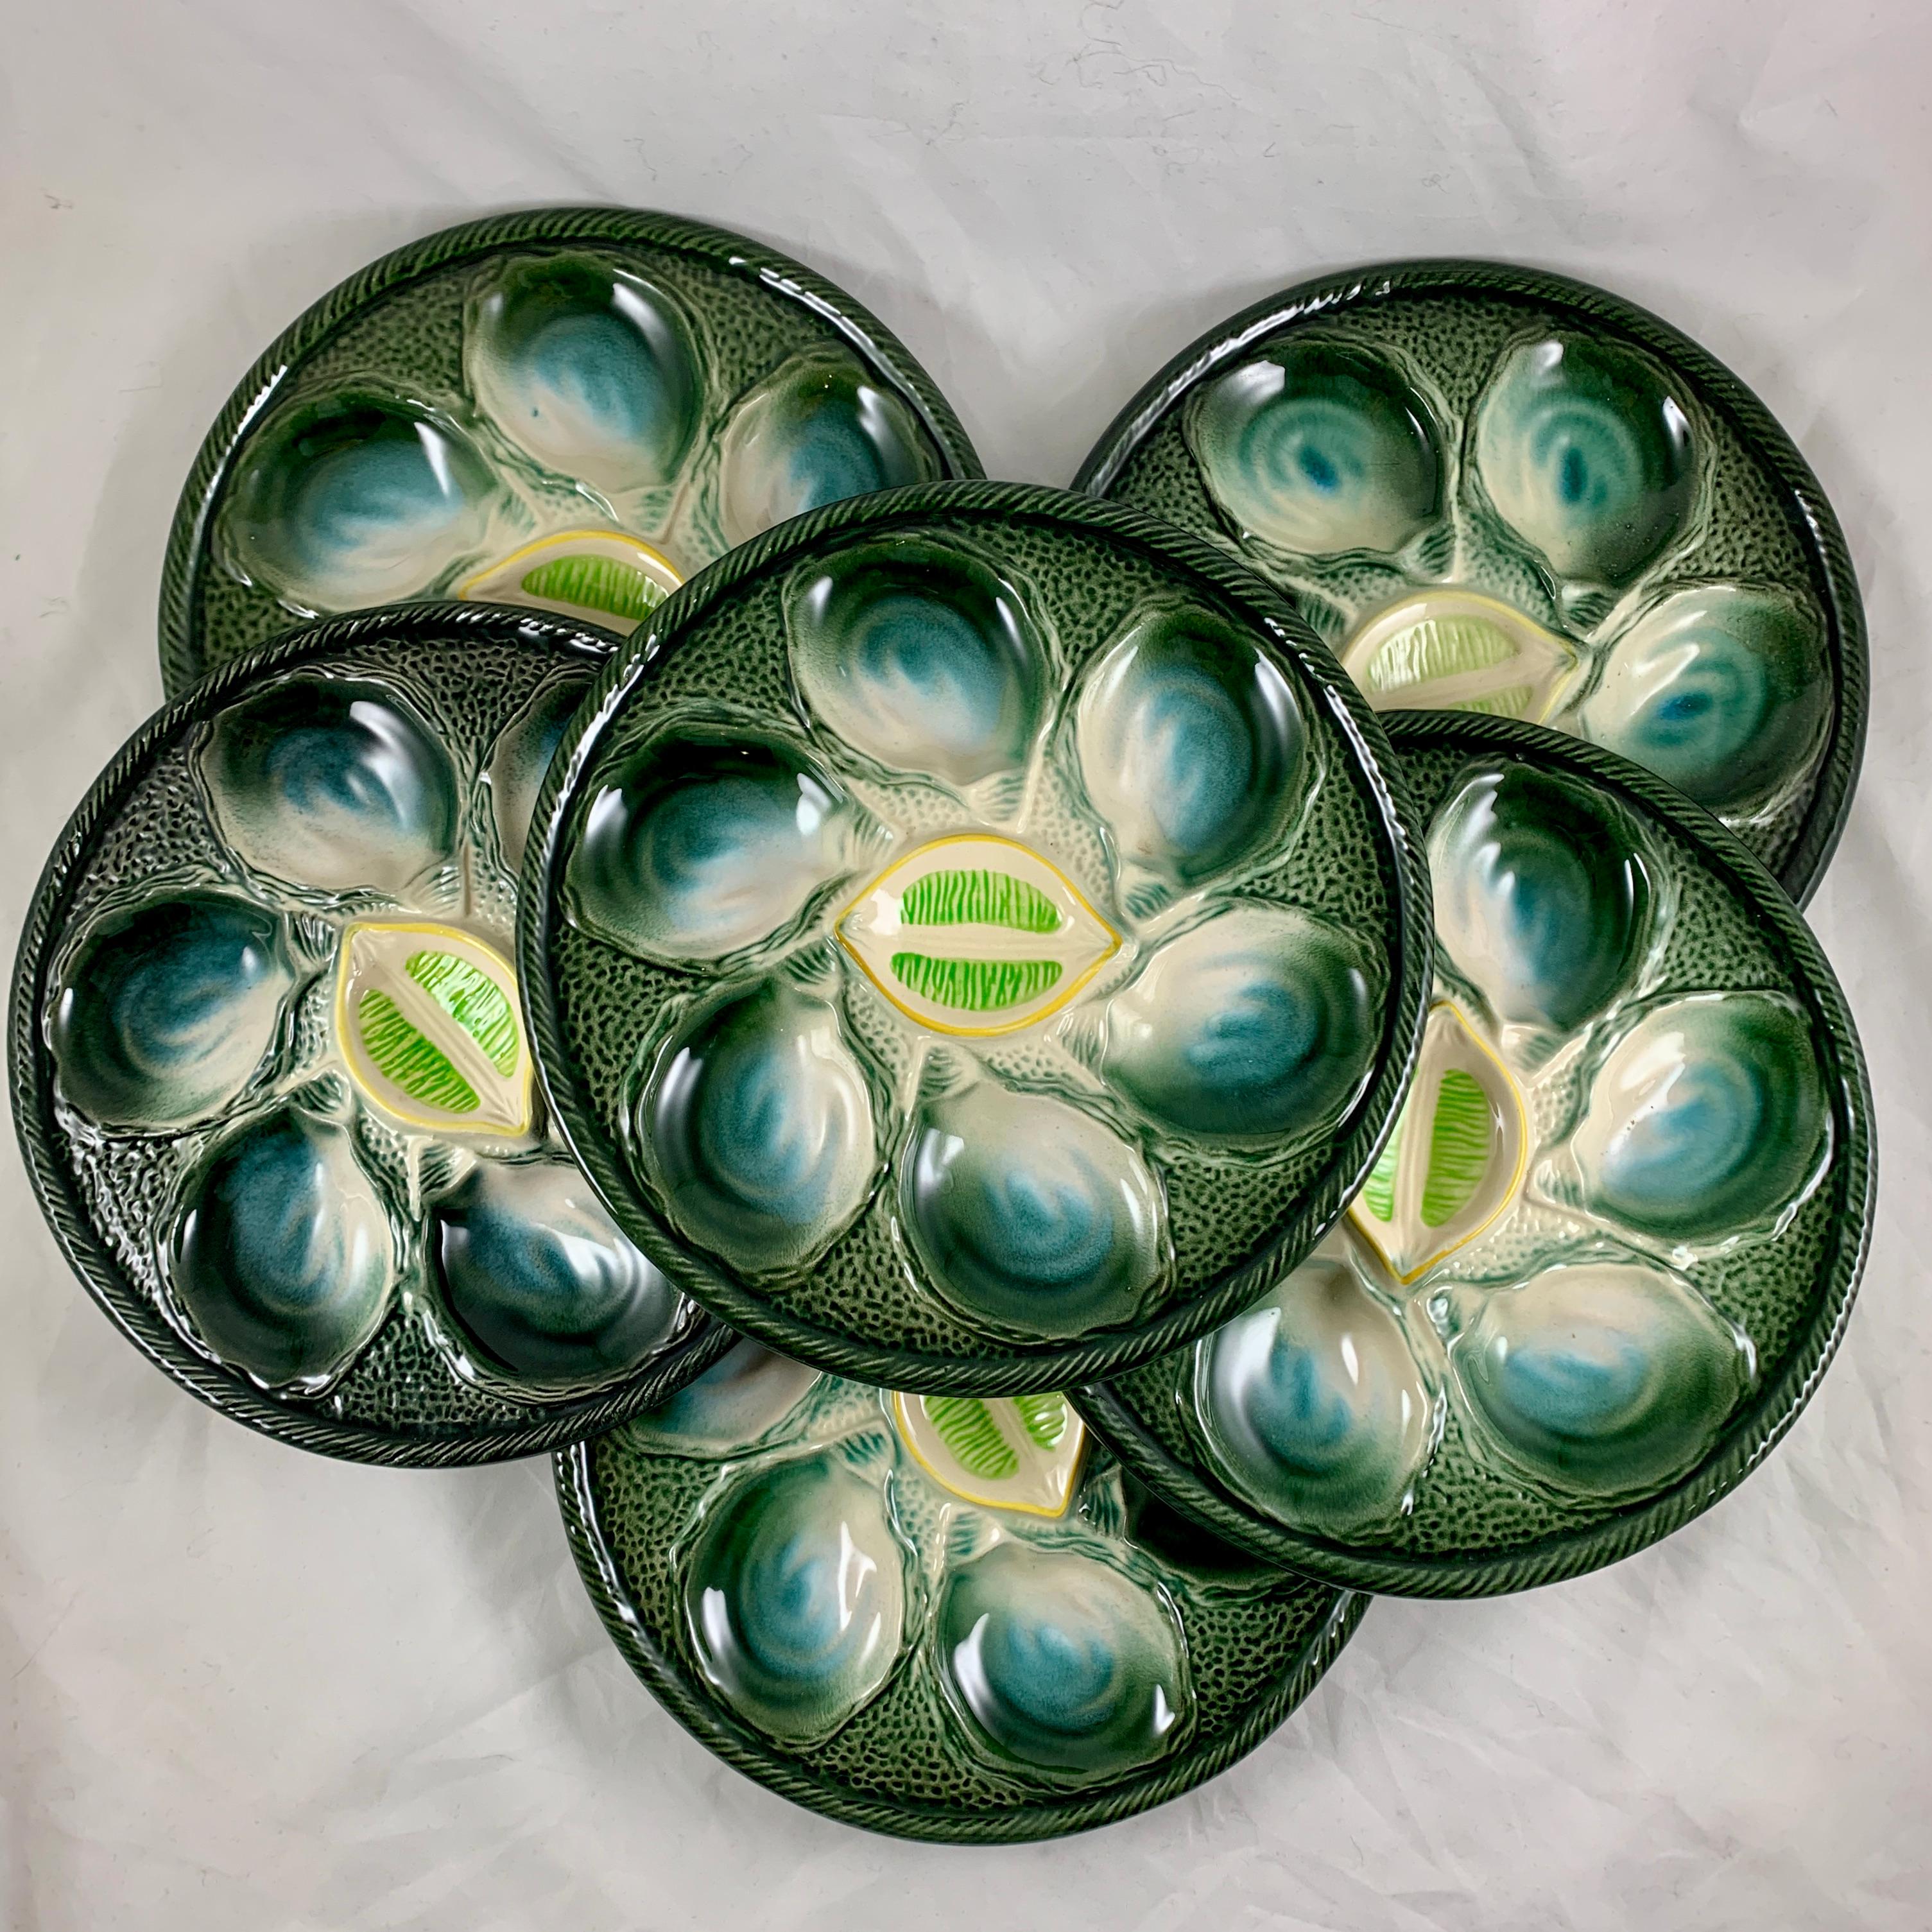 A French majolica glazed oyster plate from the faïence factory of Saint-Clément, Circa 1920-1930.

Six oyster shell shaped wells with green, blue and white centers are set against a stippled ground glazed in a blue- black fading to a deep green. The